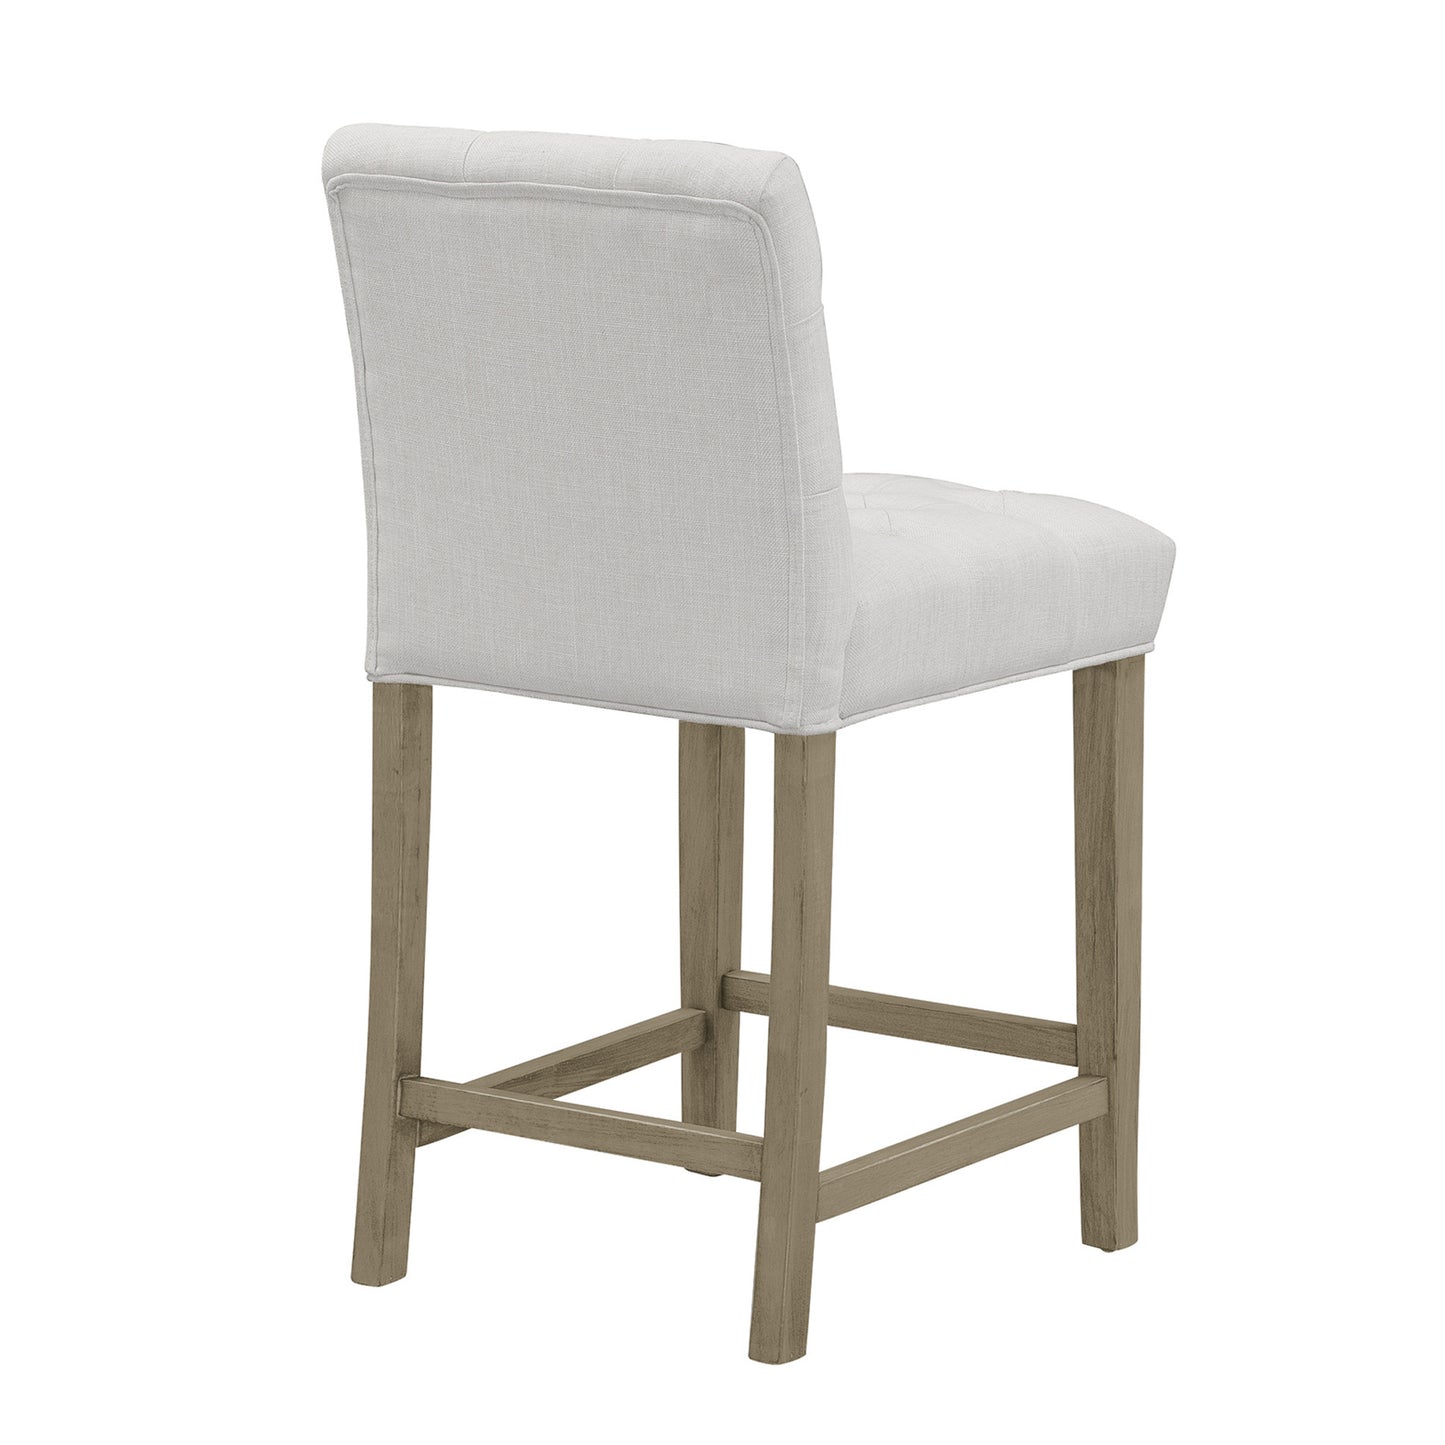 Set of 2 Alee Beige Fabric Counter Stool with Tufted Buttons and Wood Legs